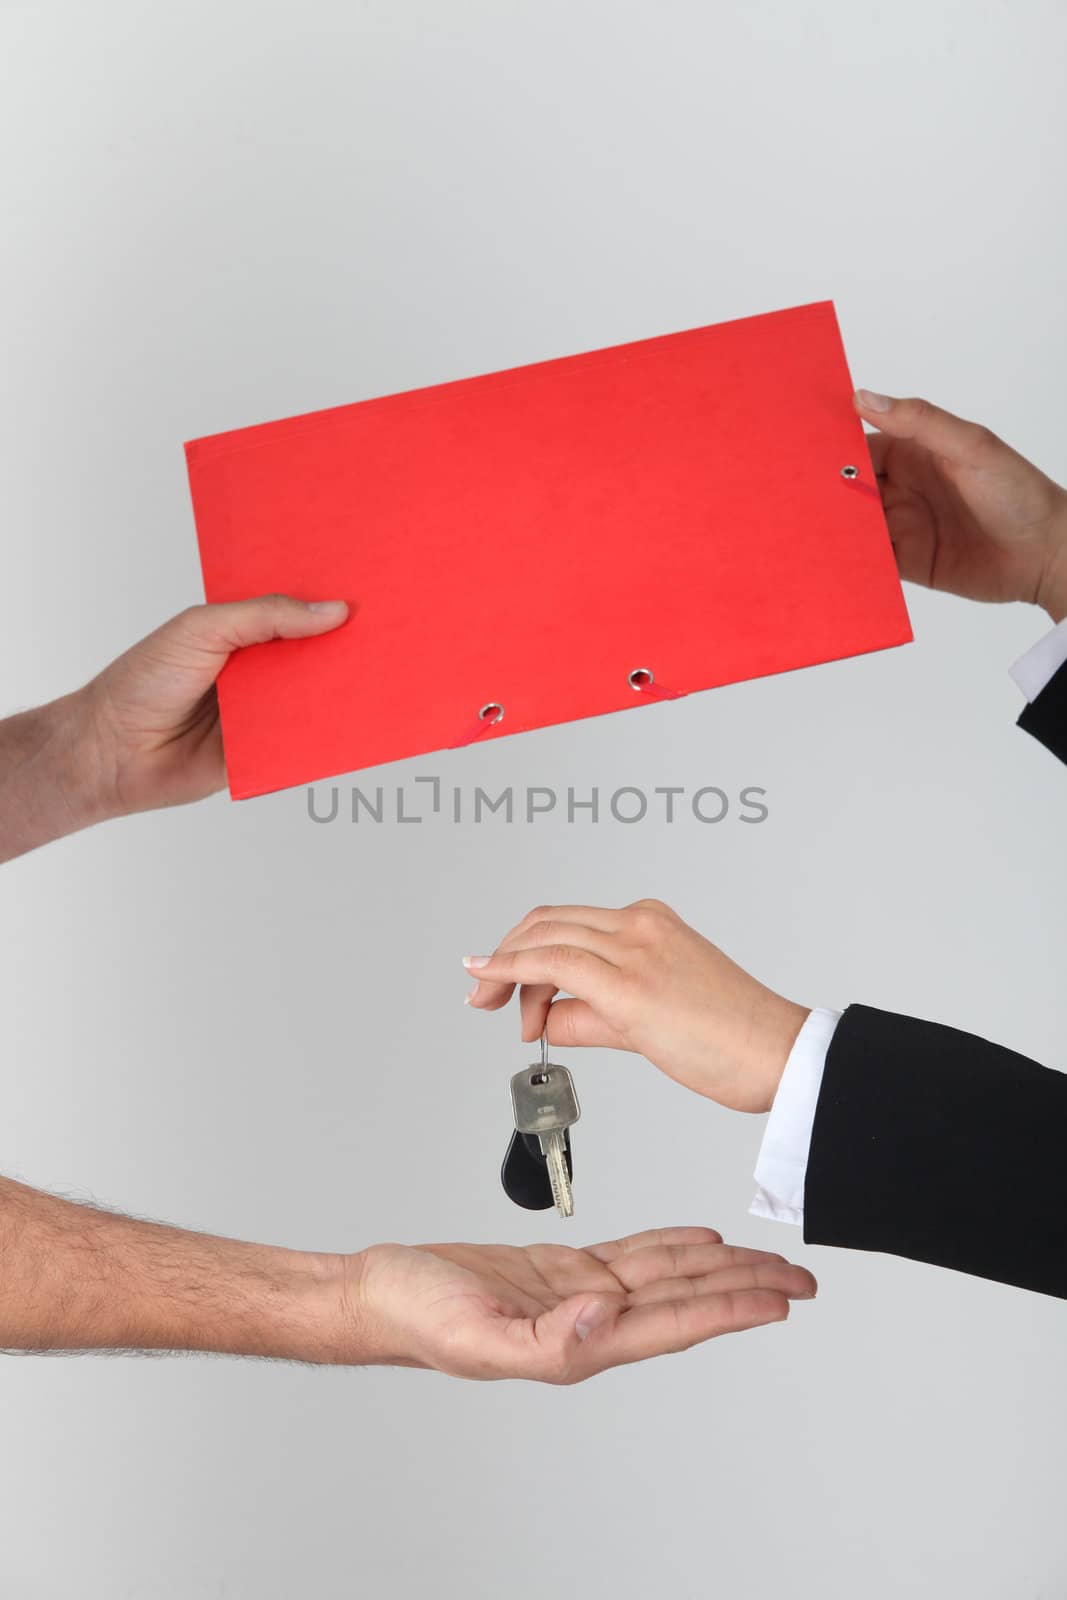 Exchanging keys and a folder by phovoir